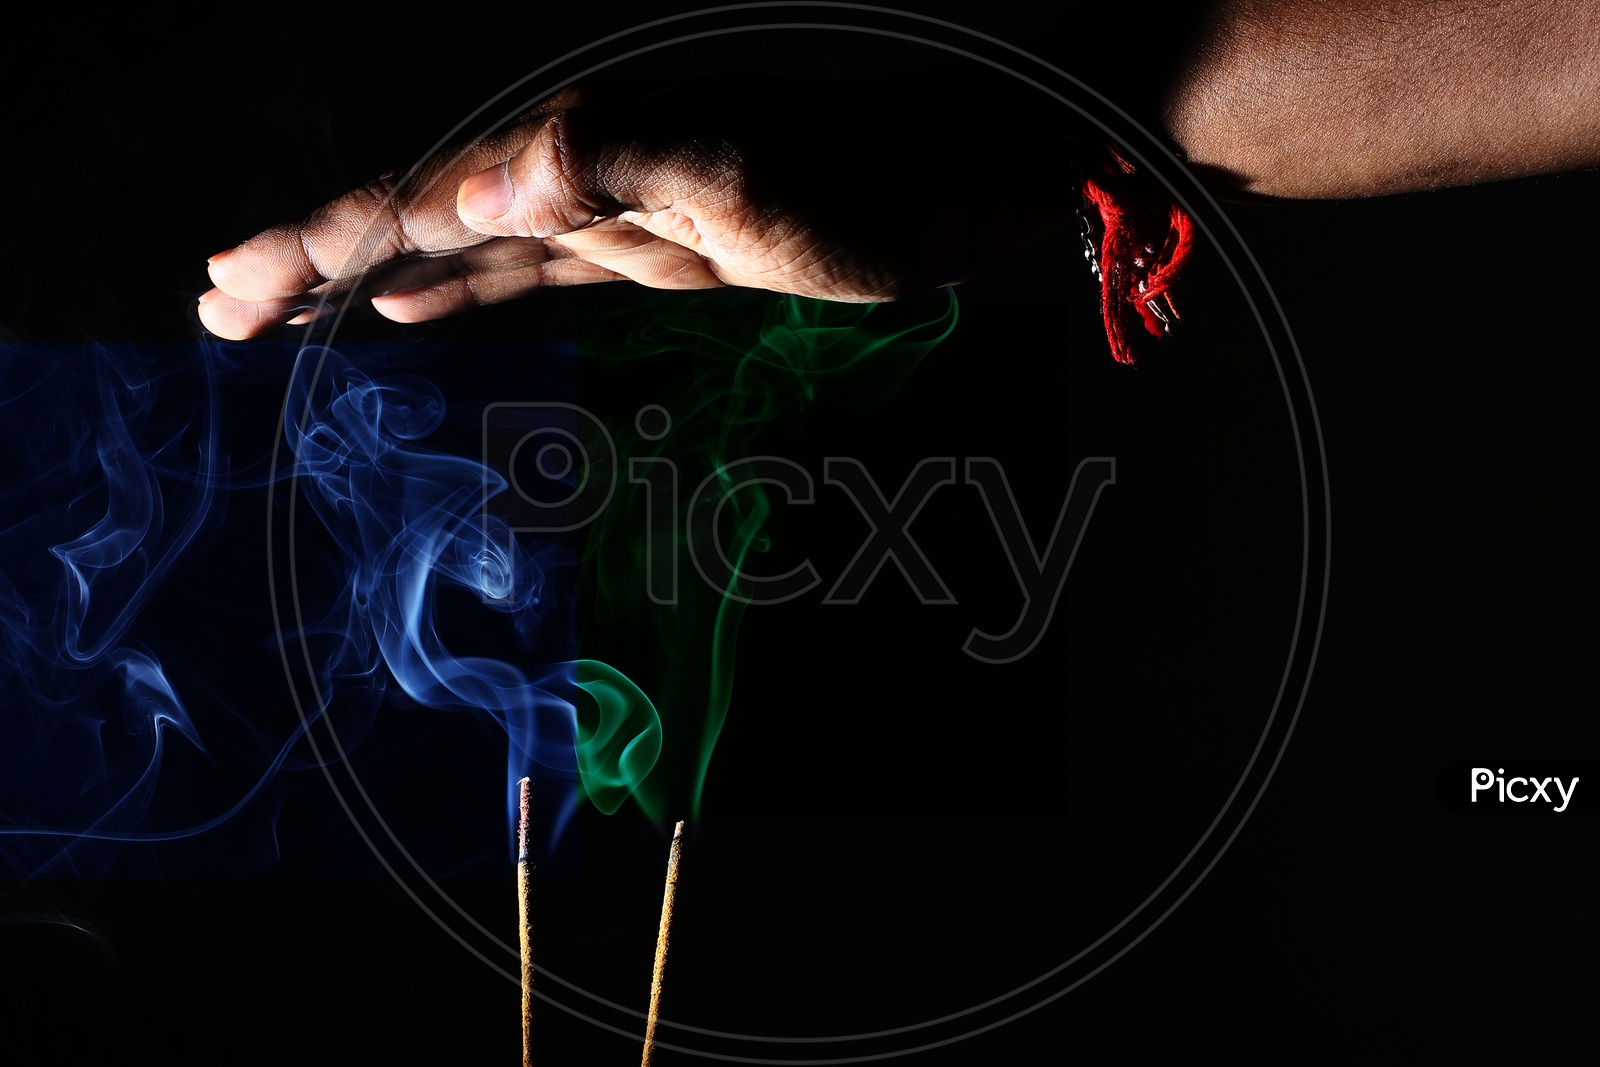 Hand Over Coloured Smoke Coming Out Of Incense Sticks. Abstract Smoke Art